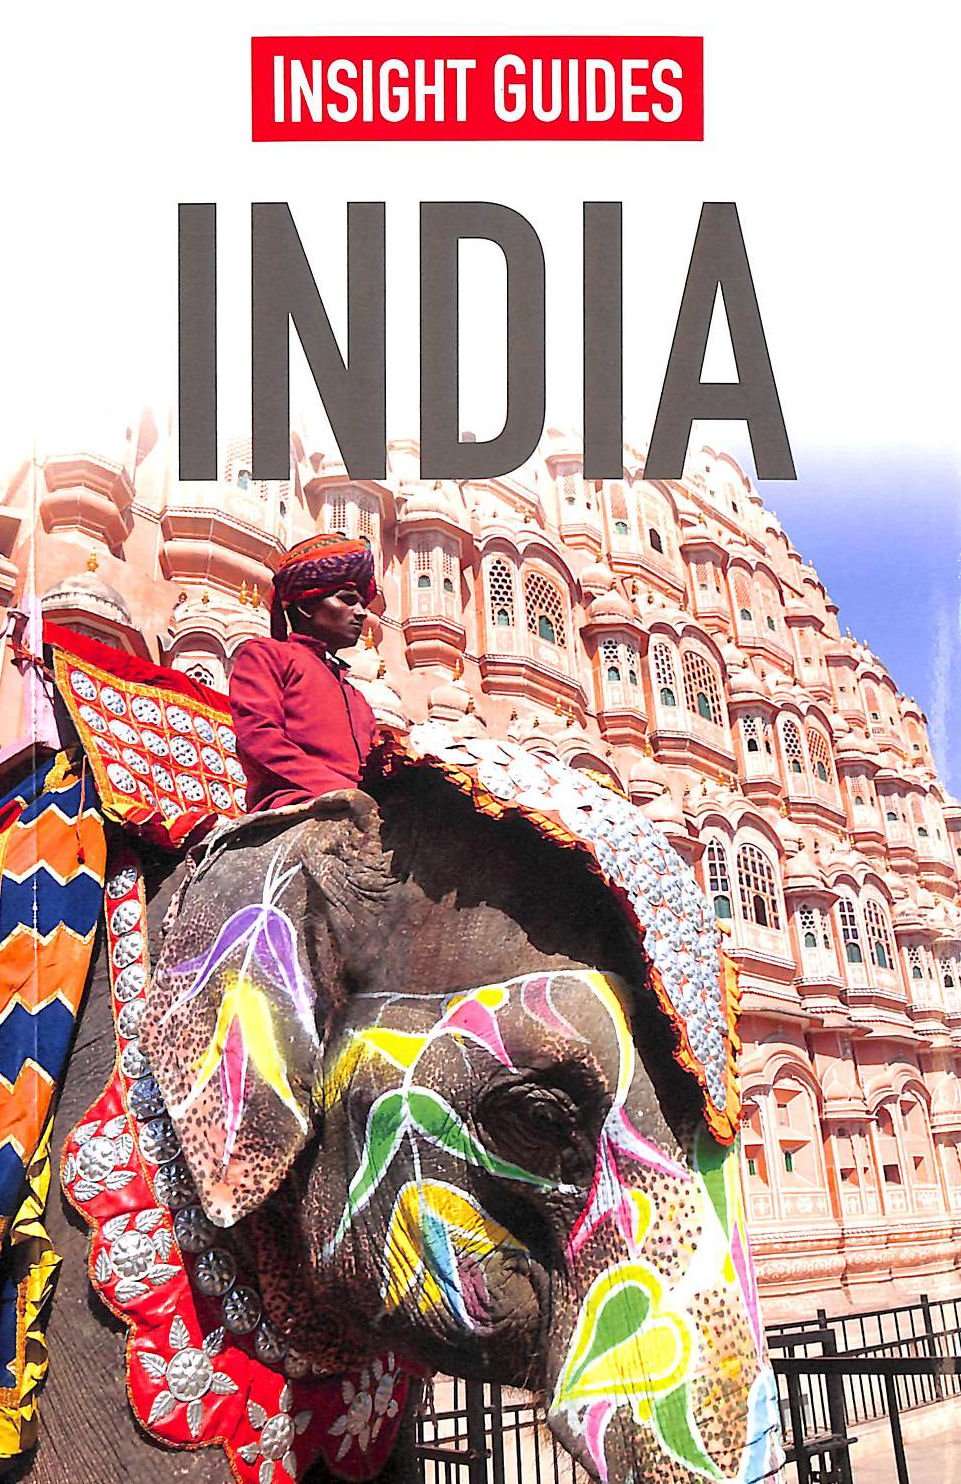 INSIGHT GUIDES - Insight Guides: India